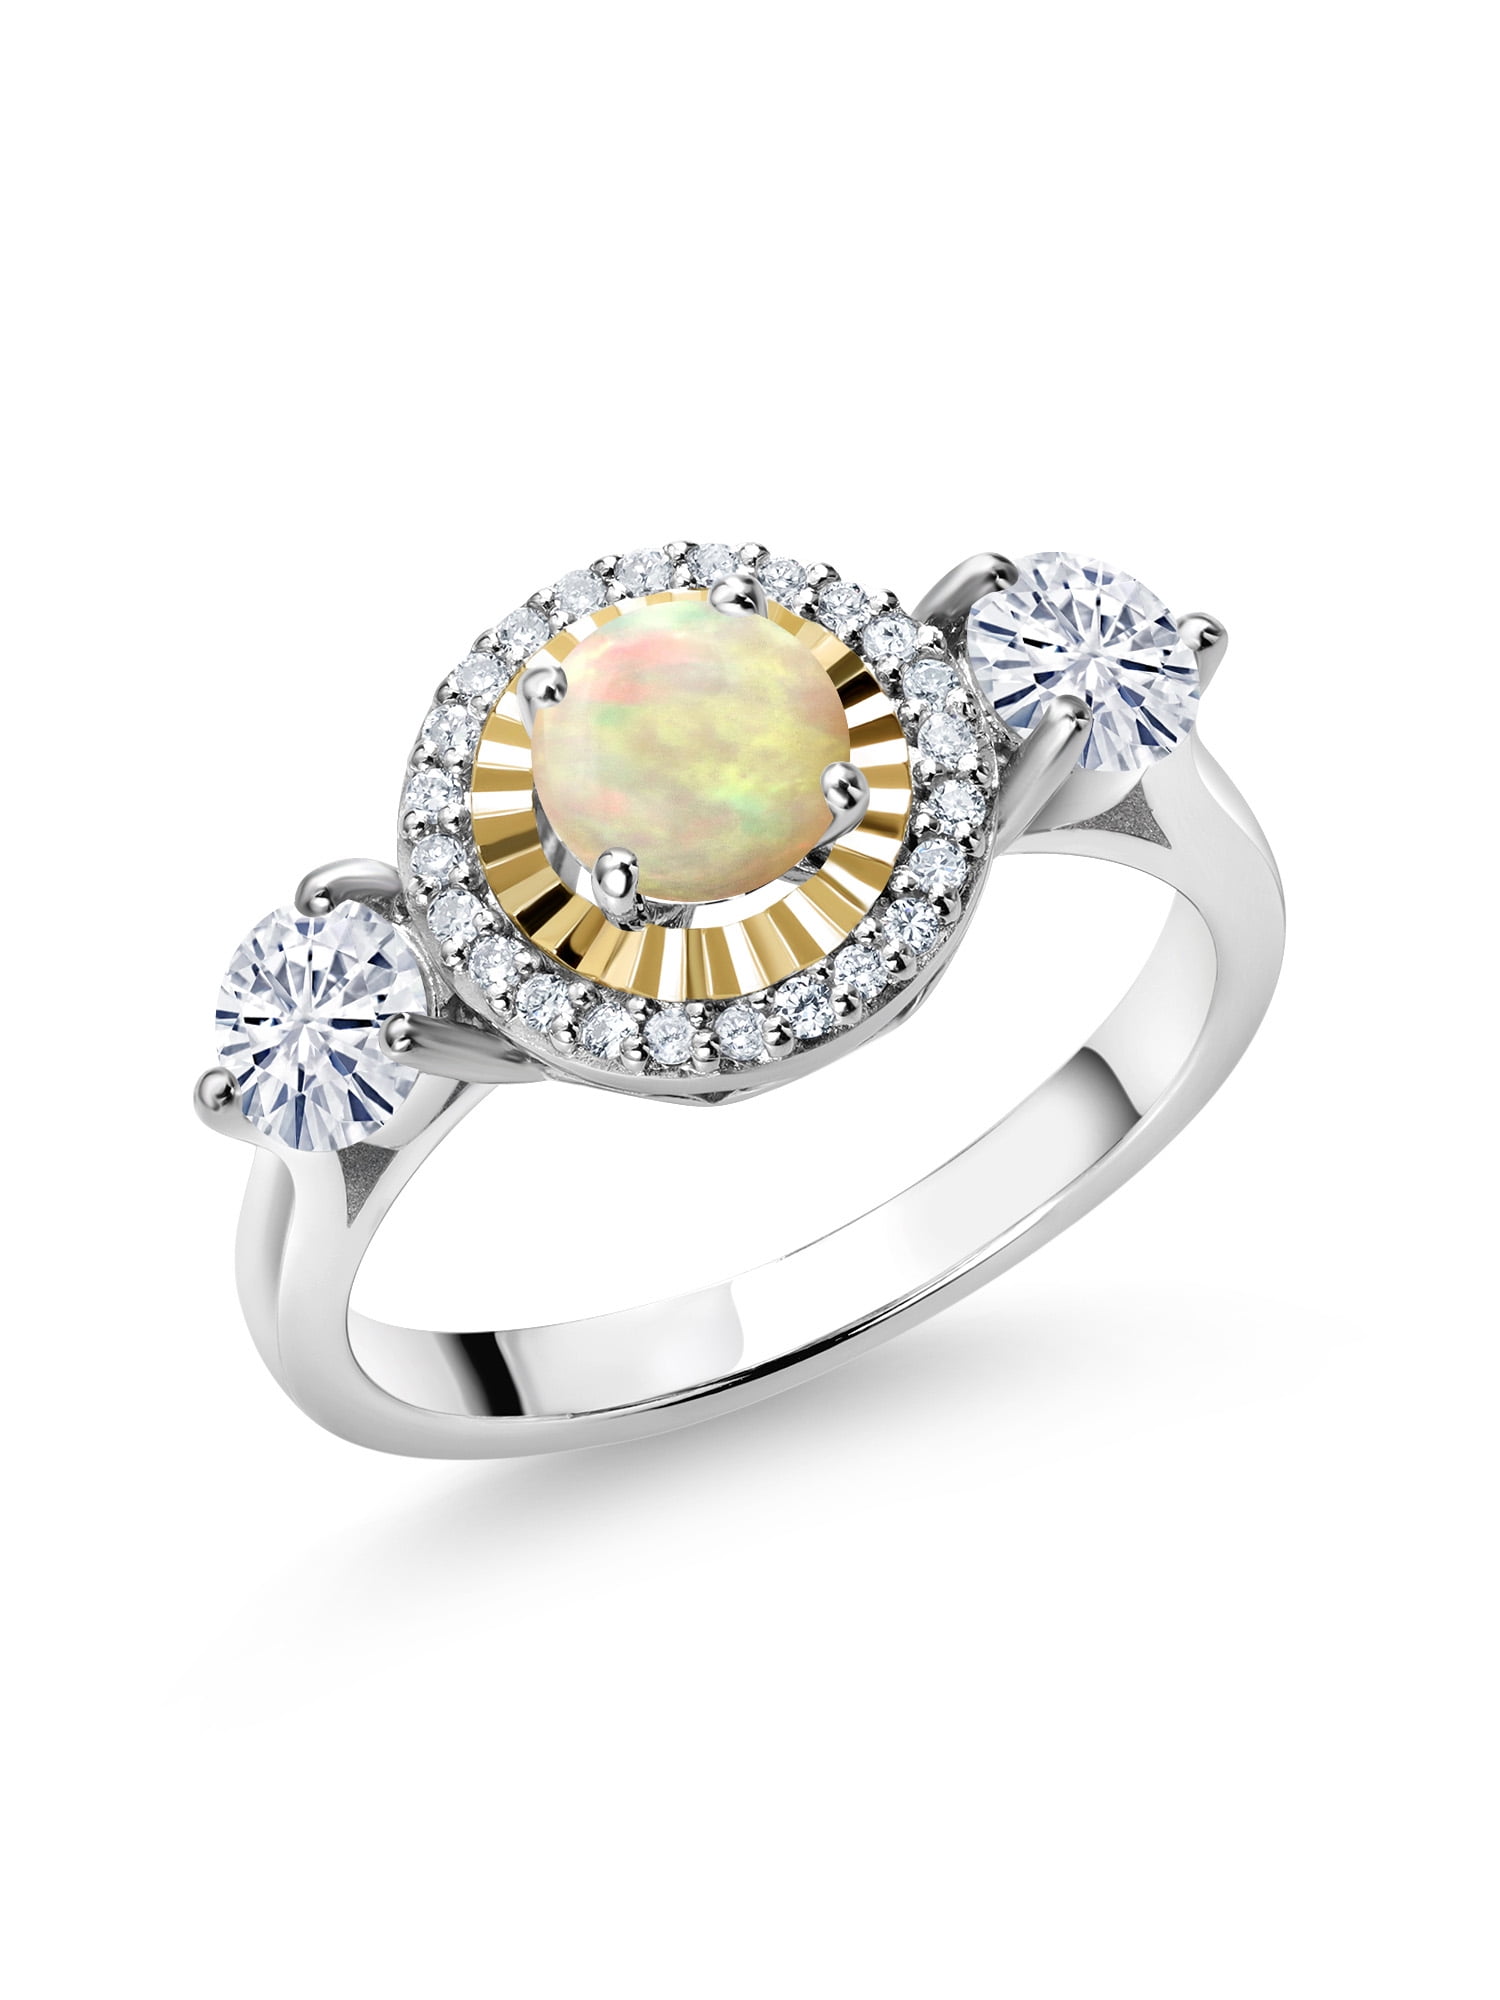 Gem Stone King 925 Silver and 10K Yellow Gold 3-Stone Lab Grown Diamond ...